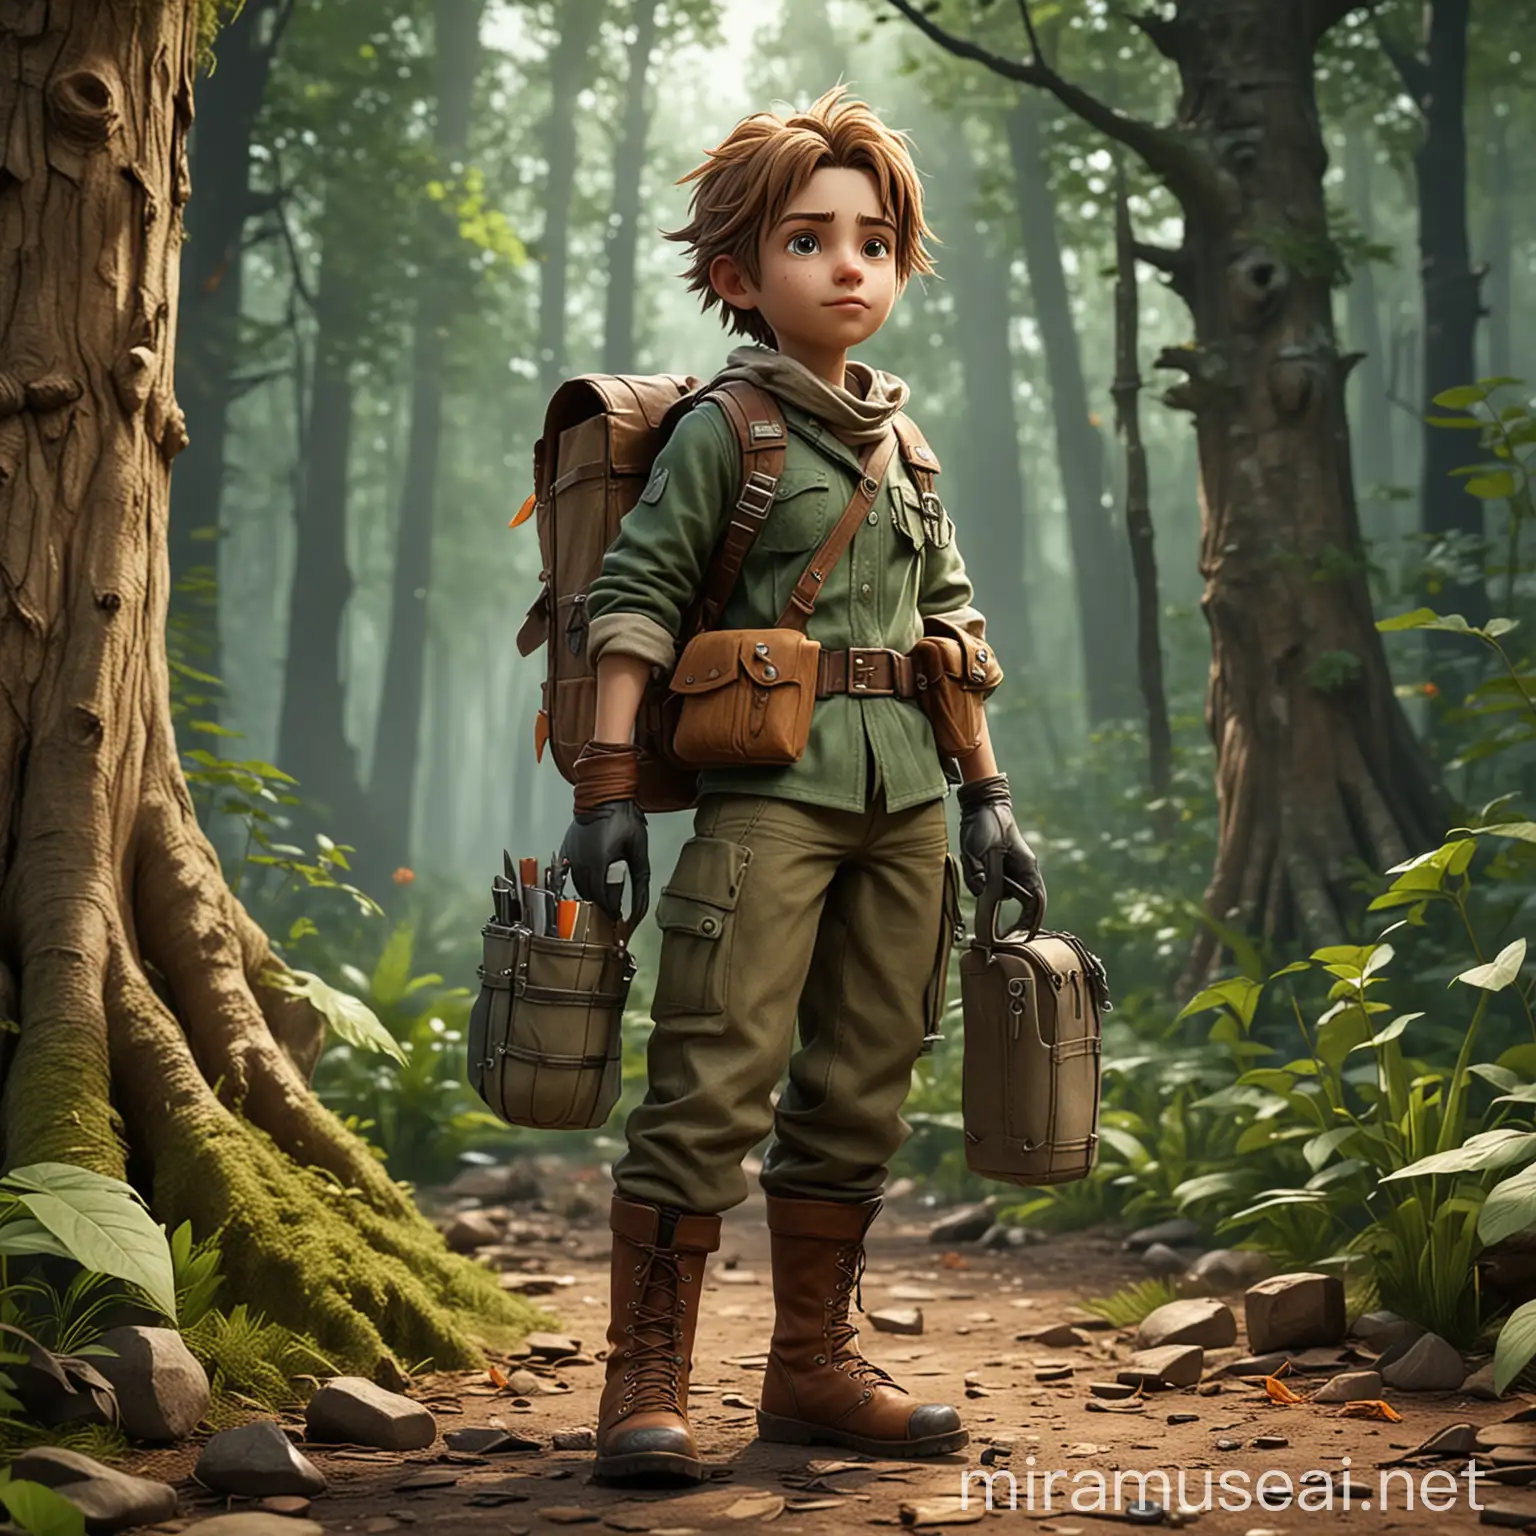 Create an Image of a young eco-warrior character looking determined and youthful. The character is dressed in eco-friendly, practical attire suitable for forest activities, including durable boots, gloves, and a tool belt with gardening tools. The character has a small bag or backpack for carrying supplies and is equipped with a magic amulet given by the ancient tree spirit, Arbor.
The character should be animated and 2D cartoonic hero best for the game
